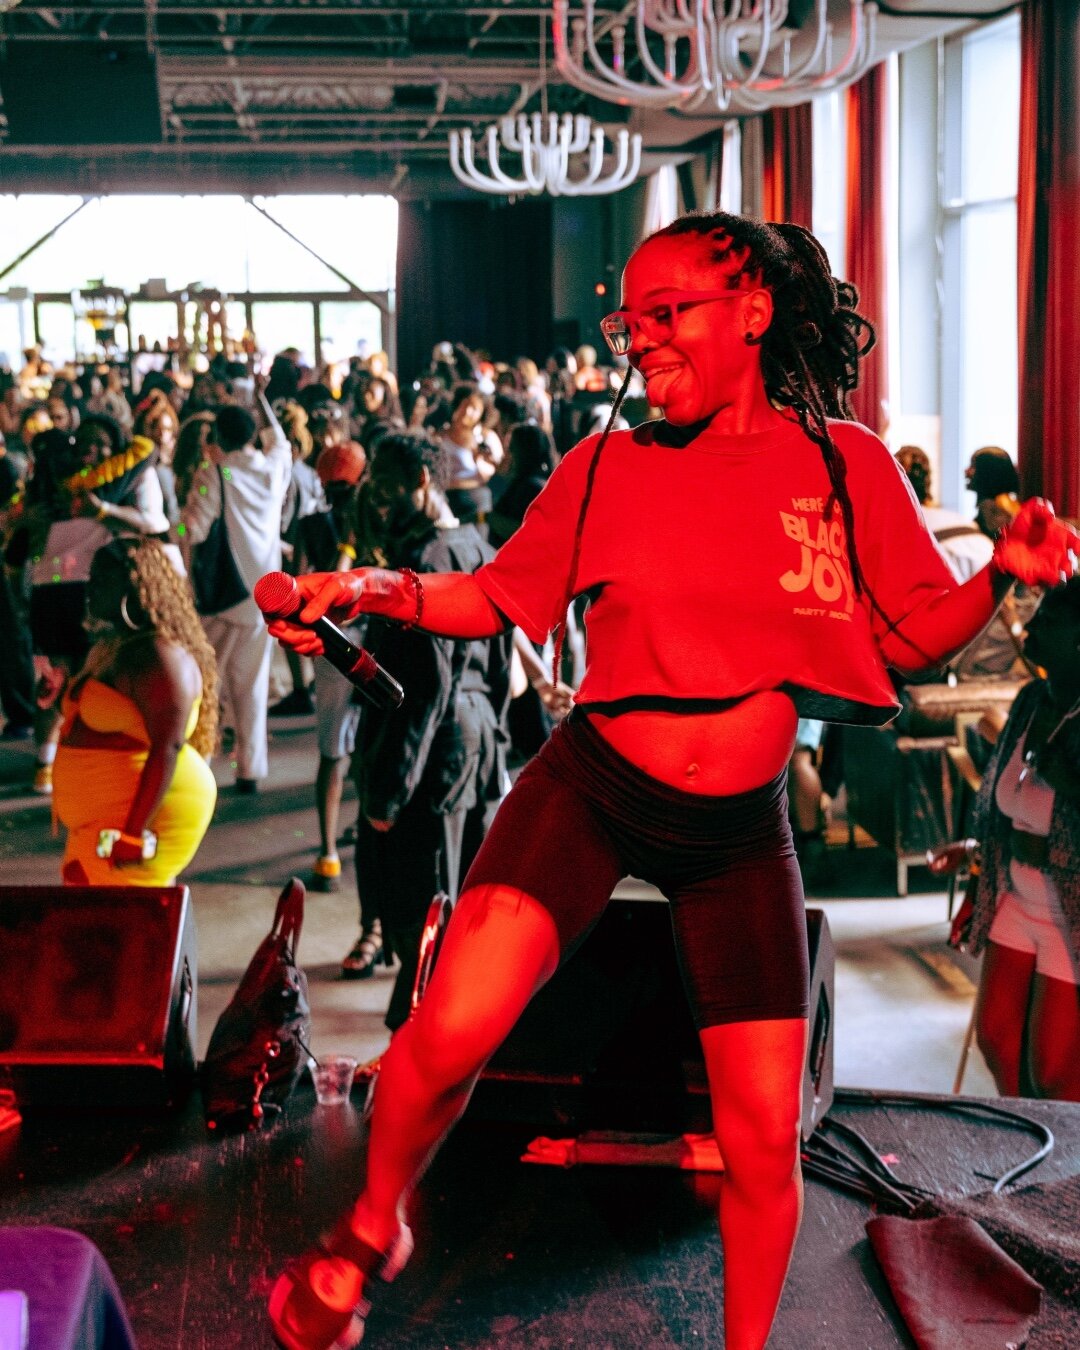 come vibe with our favorite dancin' ass DJ @RaeChardonnay at The Block Stage tomorrow at @thesilverroom block party at 8 pm! 
 
💵 Use the code &quot;partynoire&quot; for a discount! 
 
📸 @lyricnewbern 
. 
. 
. 
. 
#PartyNoire #BlackJoy #chicagoquee